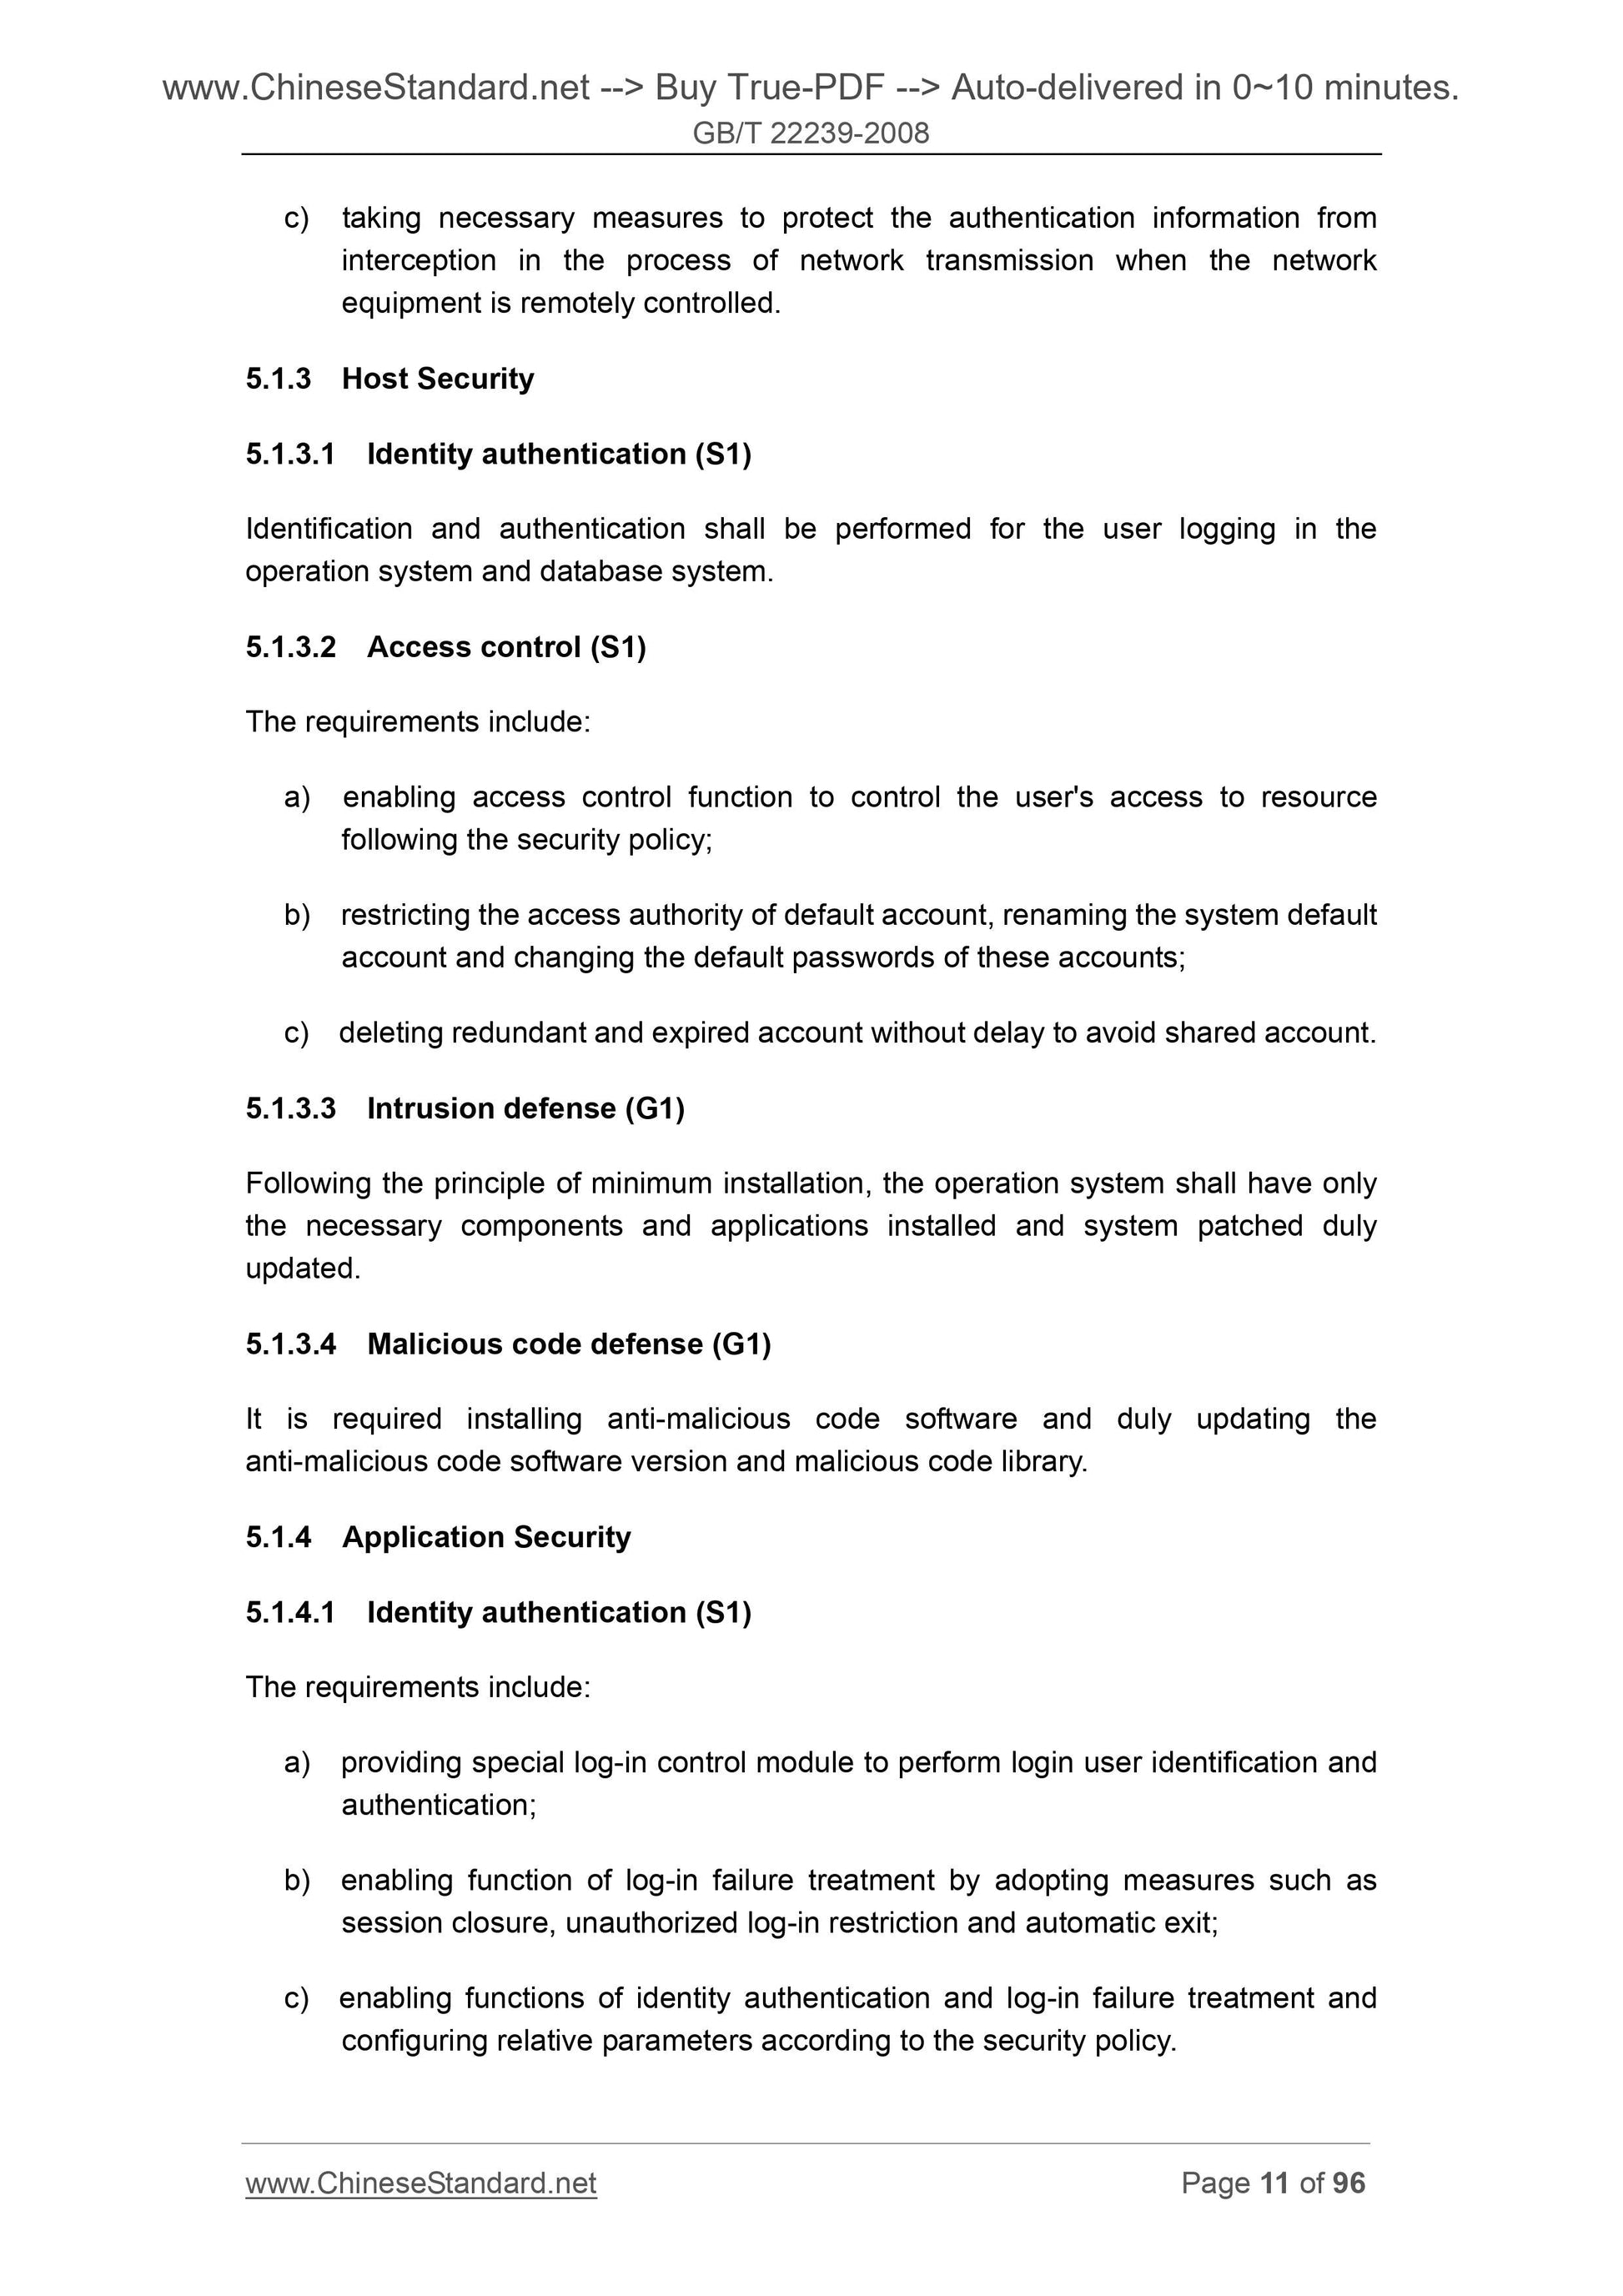 GB/T 22239-2008 Page 11